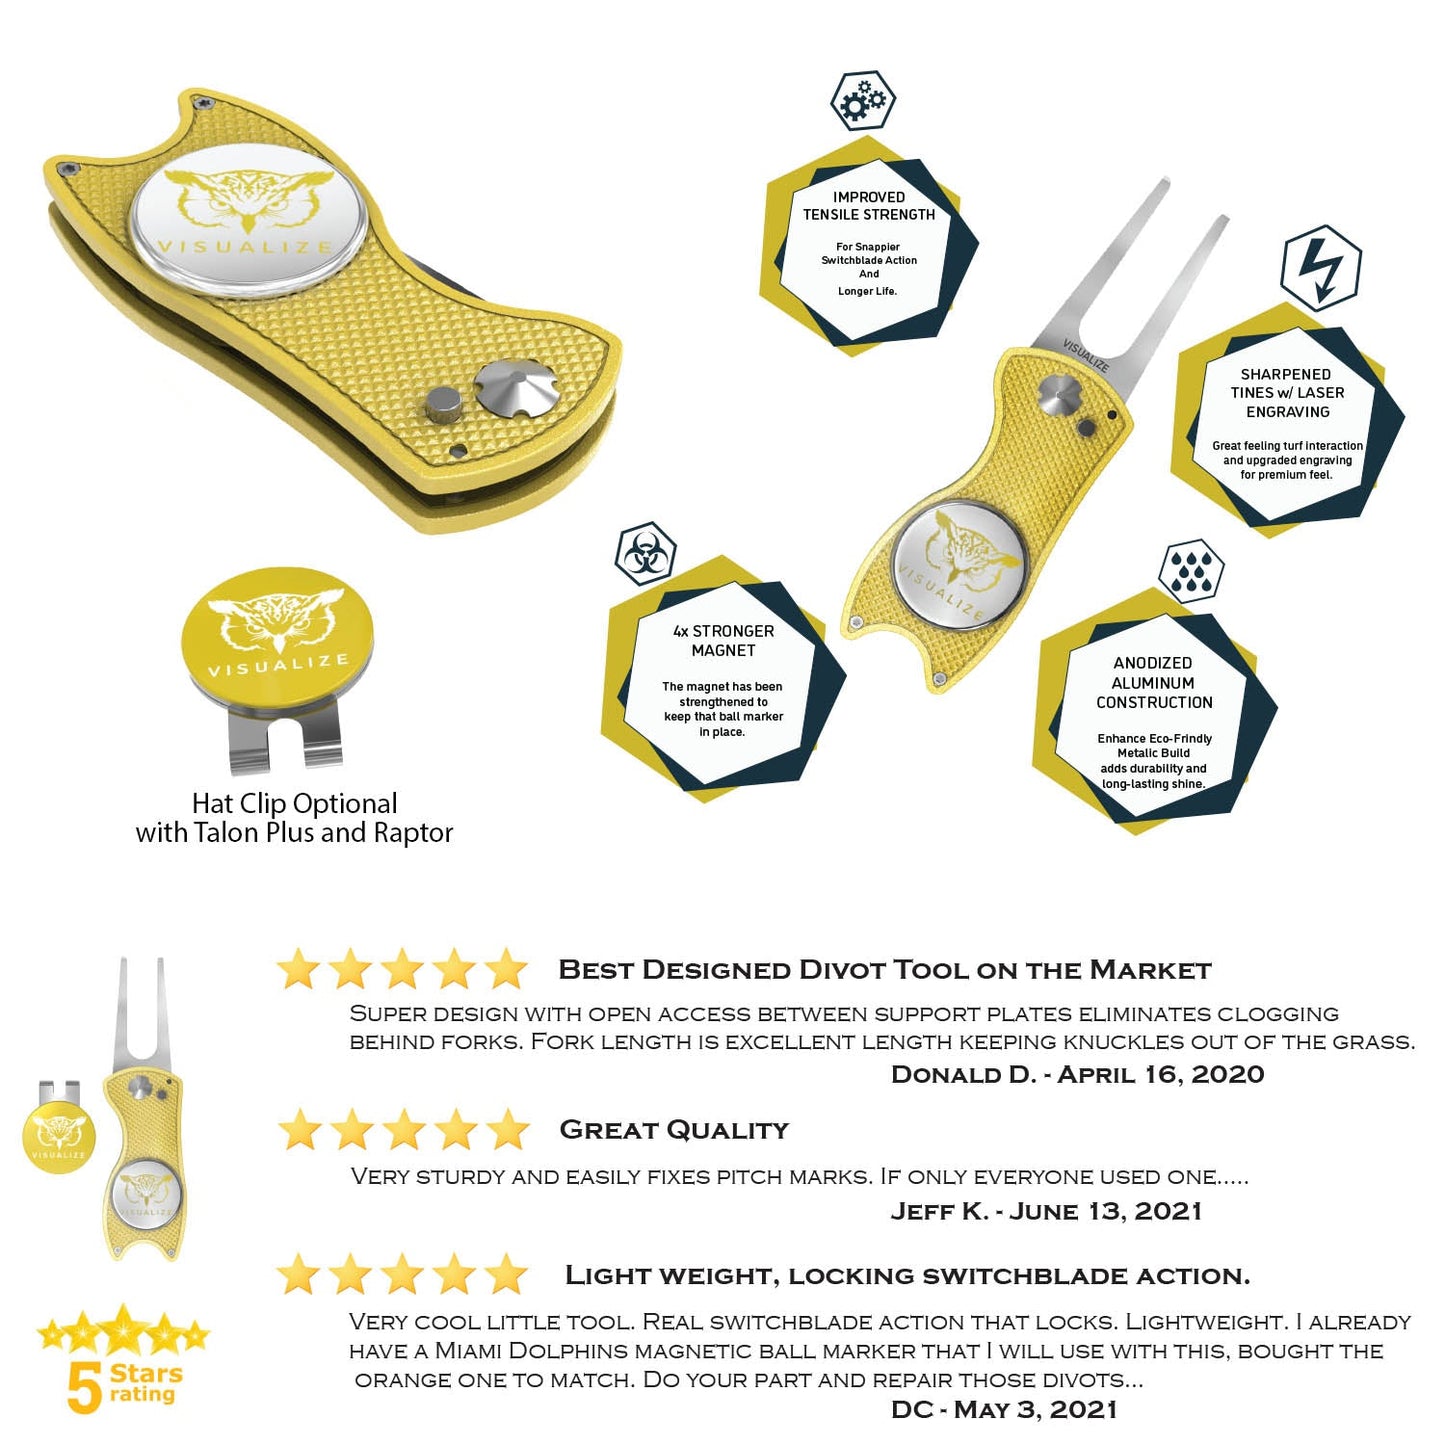 A graphic image of the qualities of the divot tools and some 5-star product reviews. 